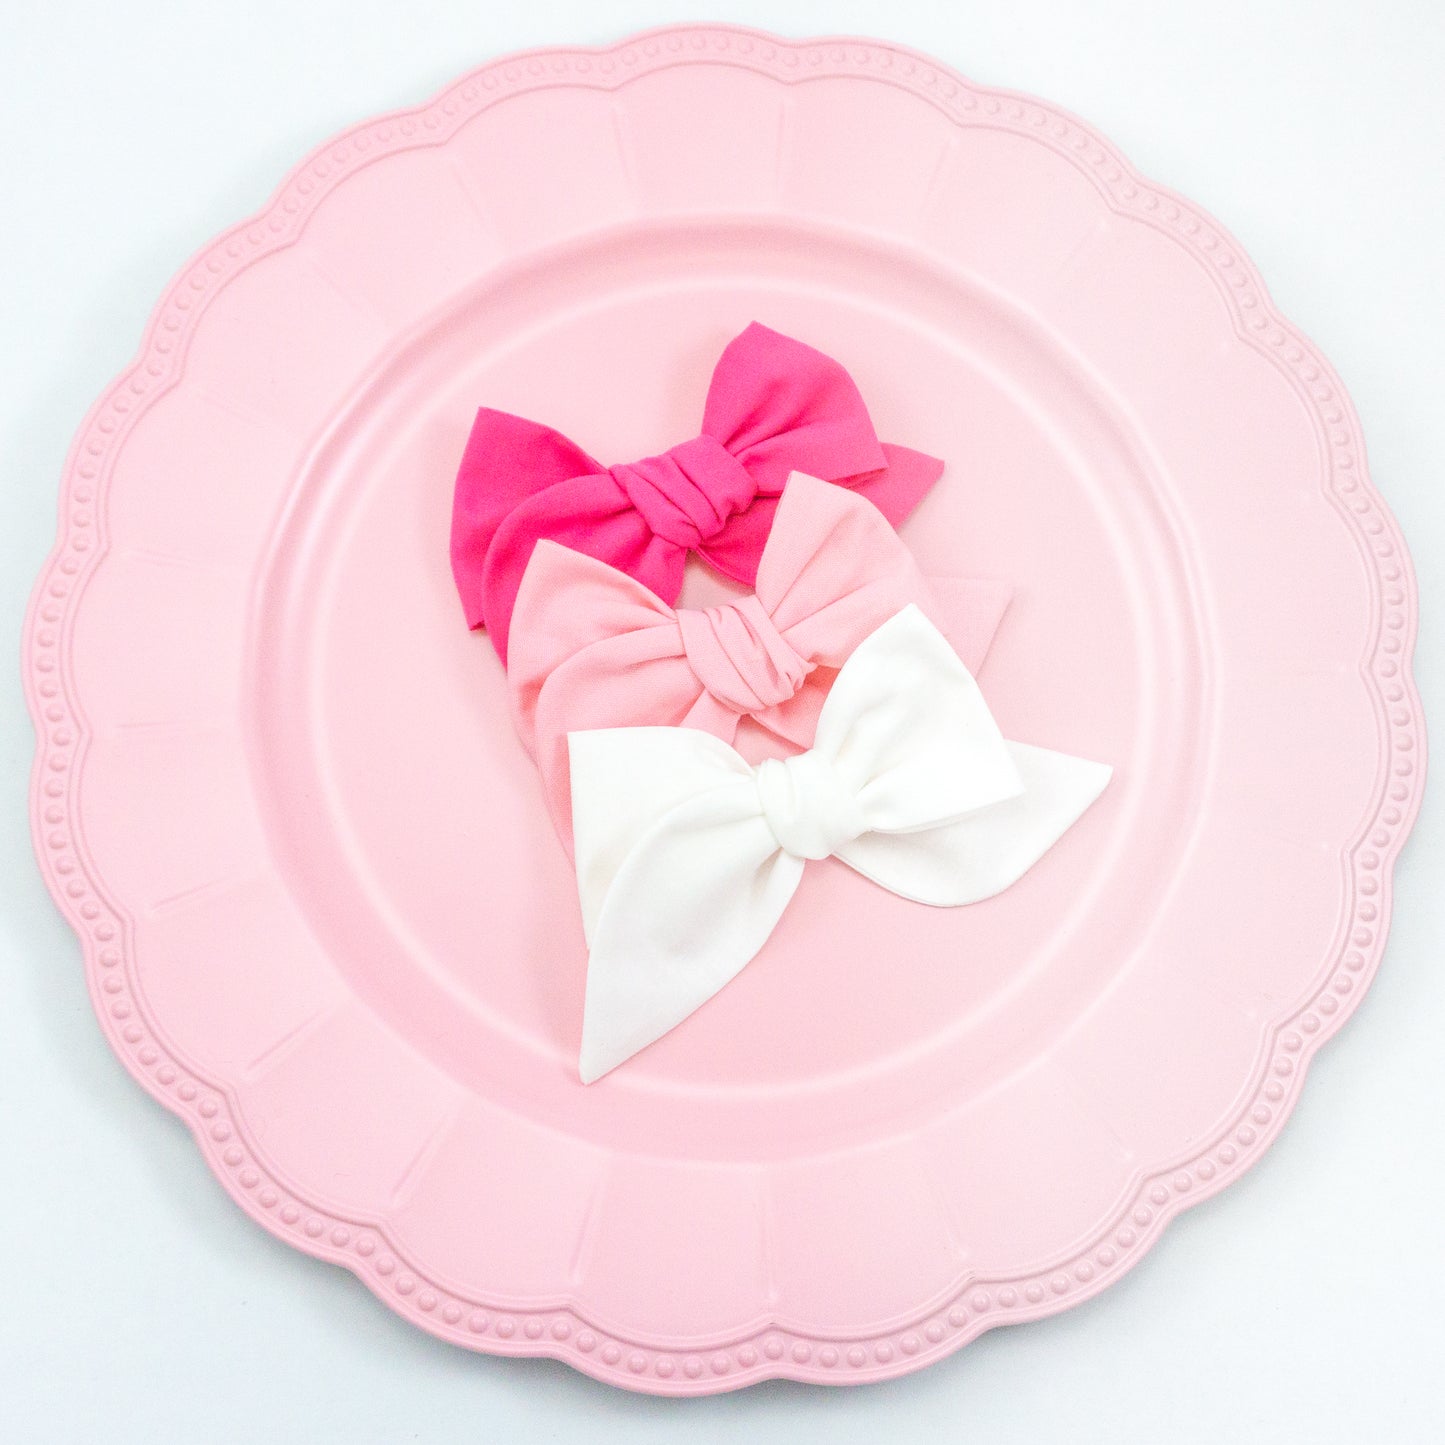 Handtied Fabric Bow - Bright Pink